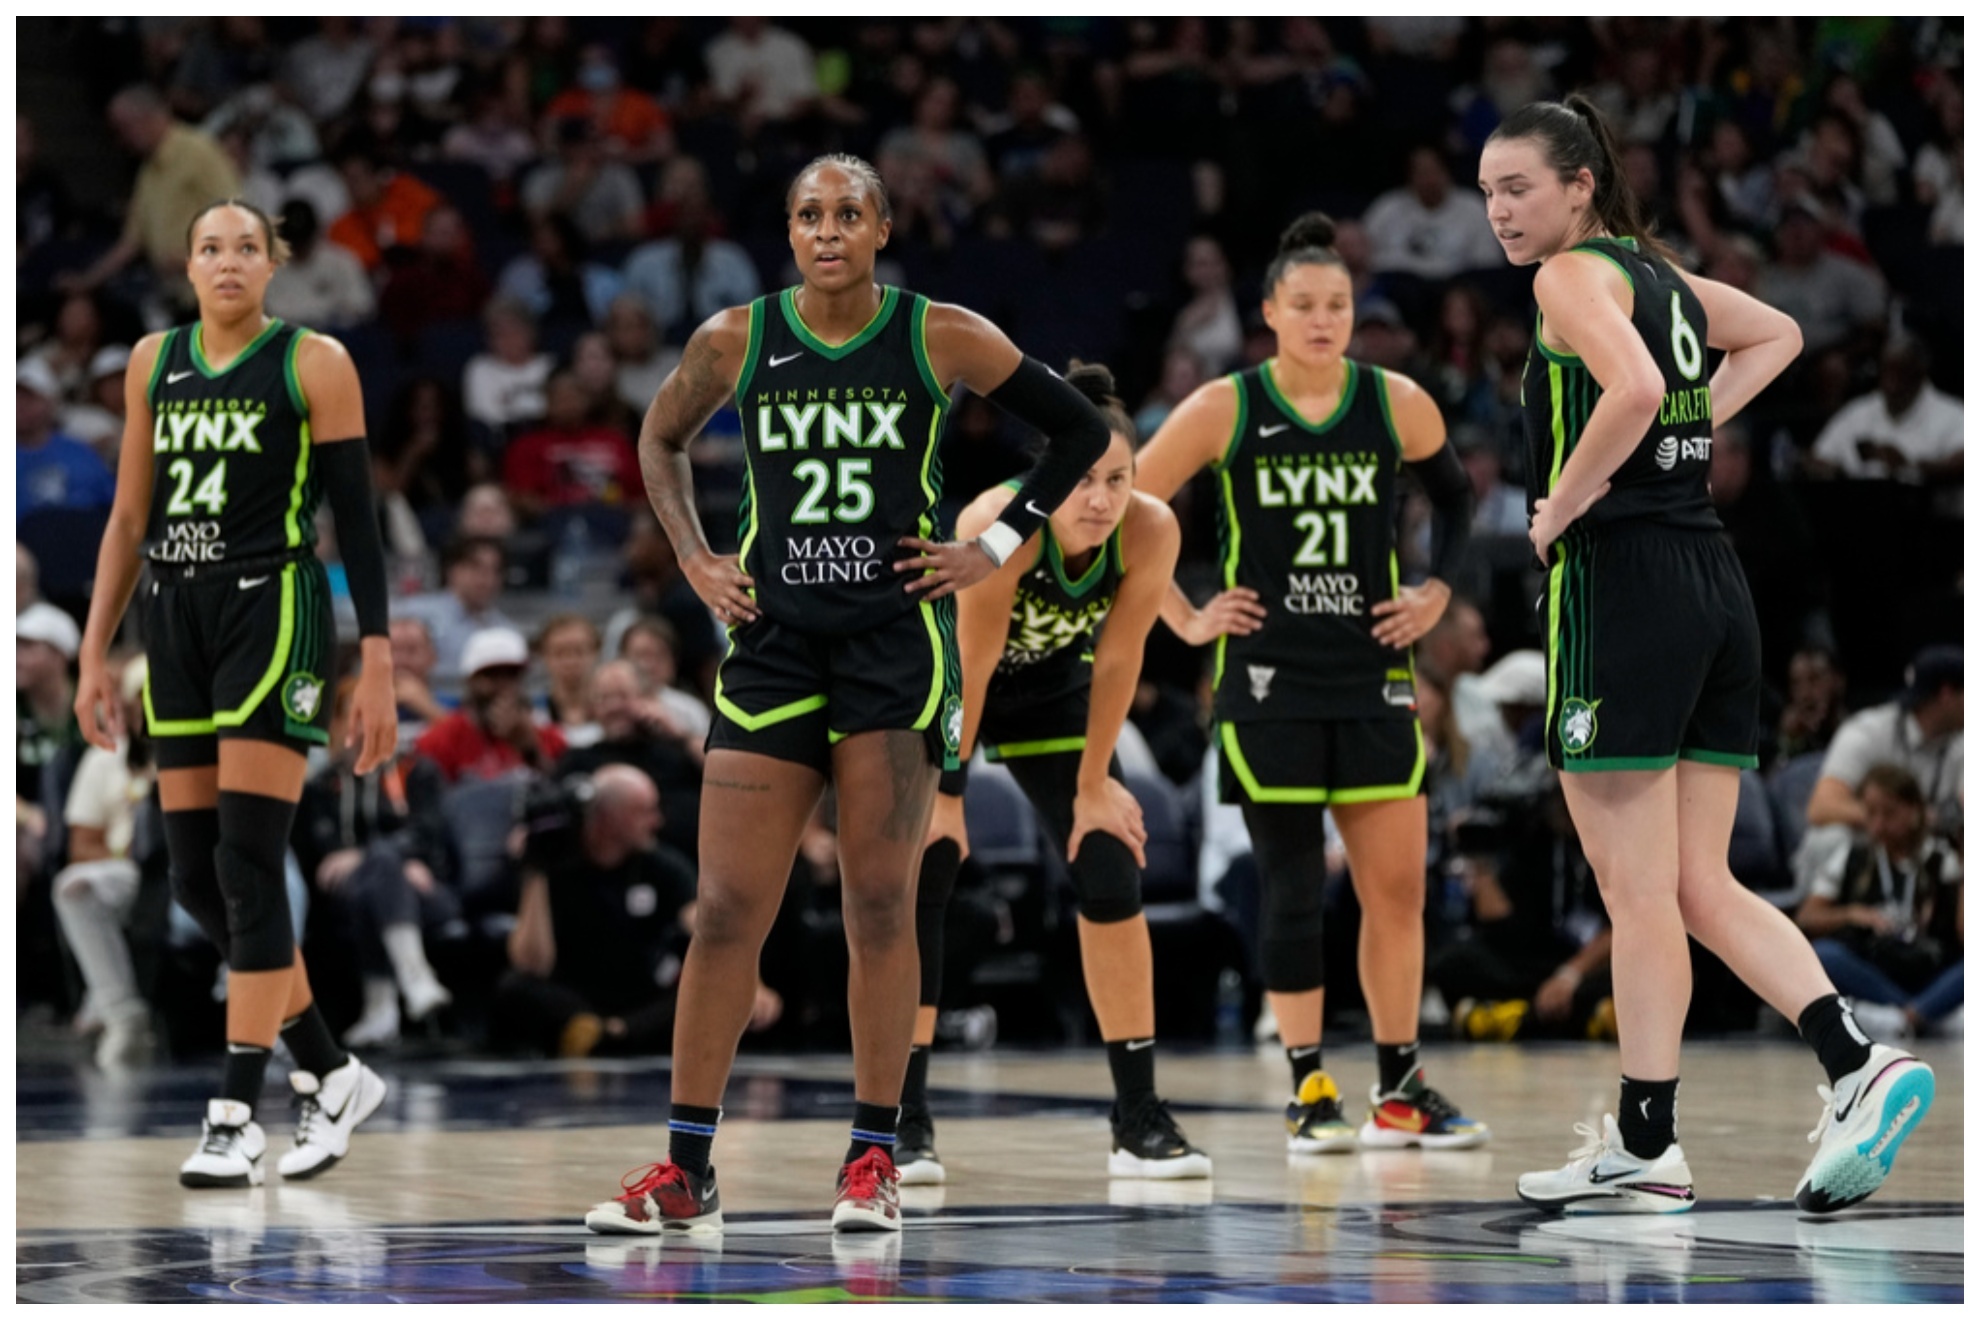 Lynx is the team with the most WNBA championships